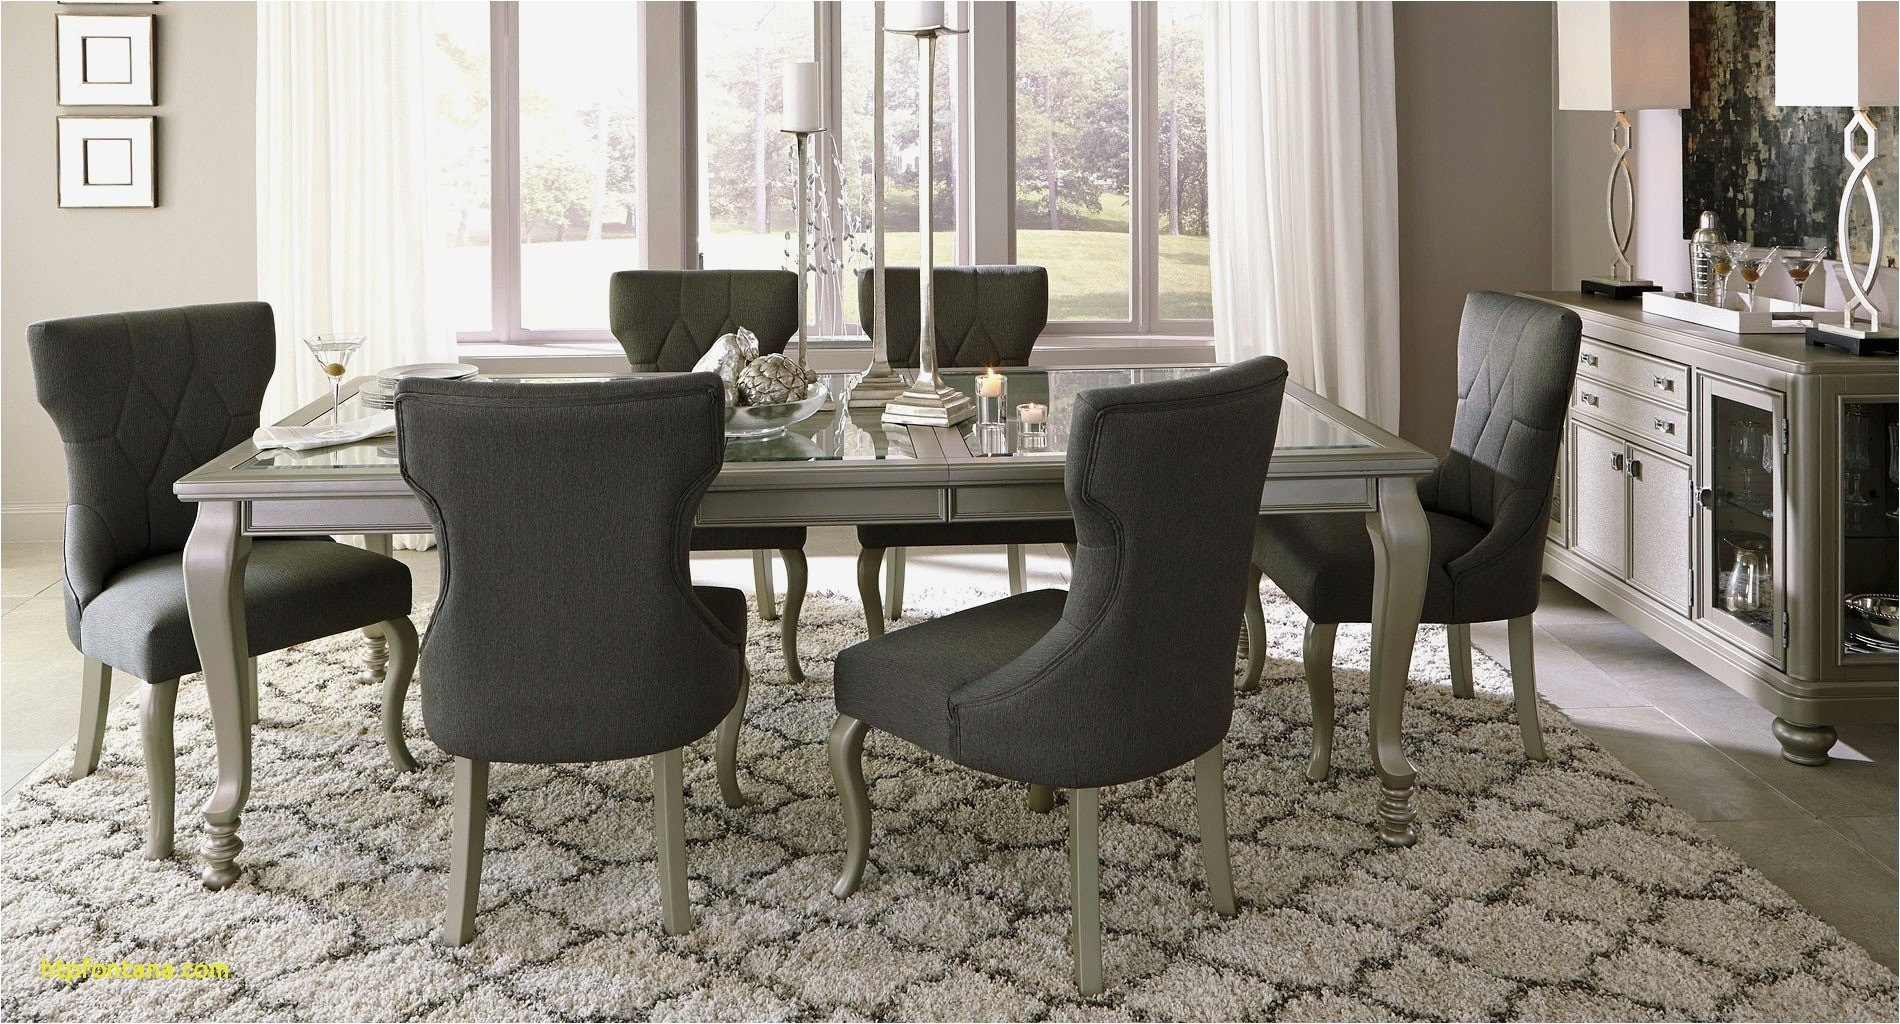 macys furniture dining set new awesome dining table in living room images of macys furniture dining